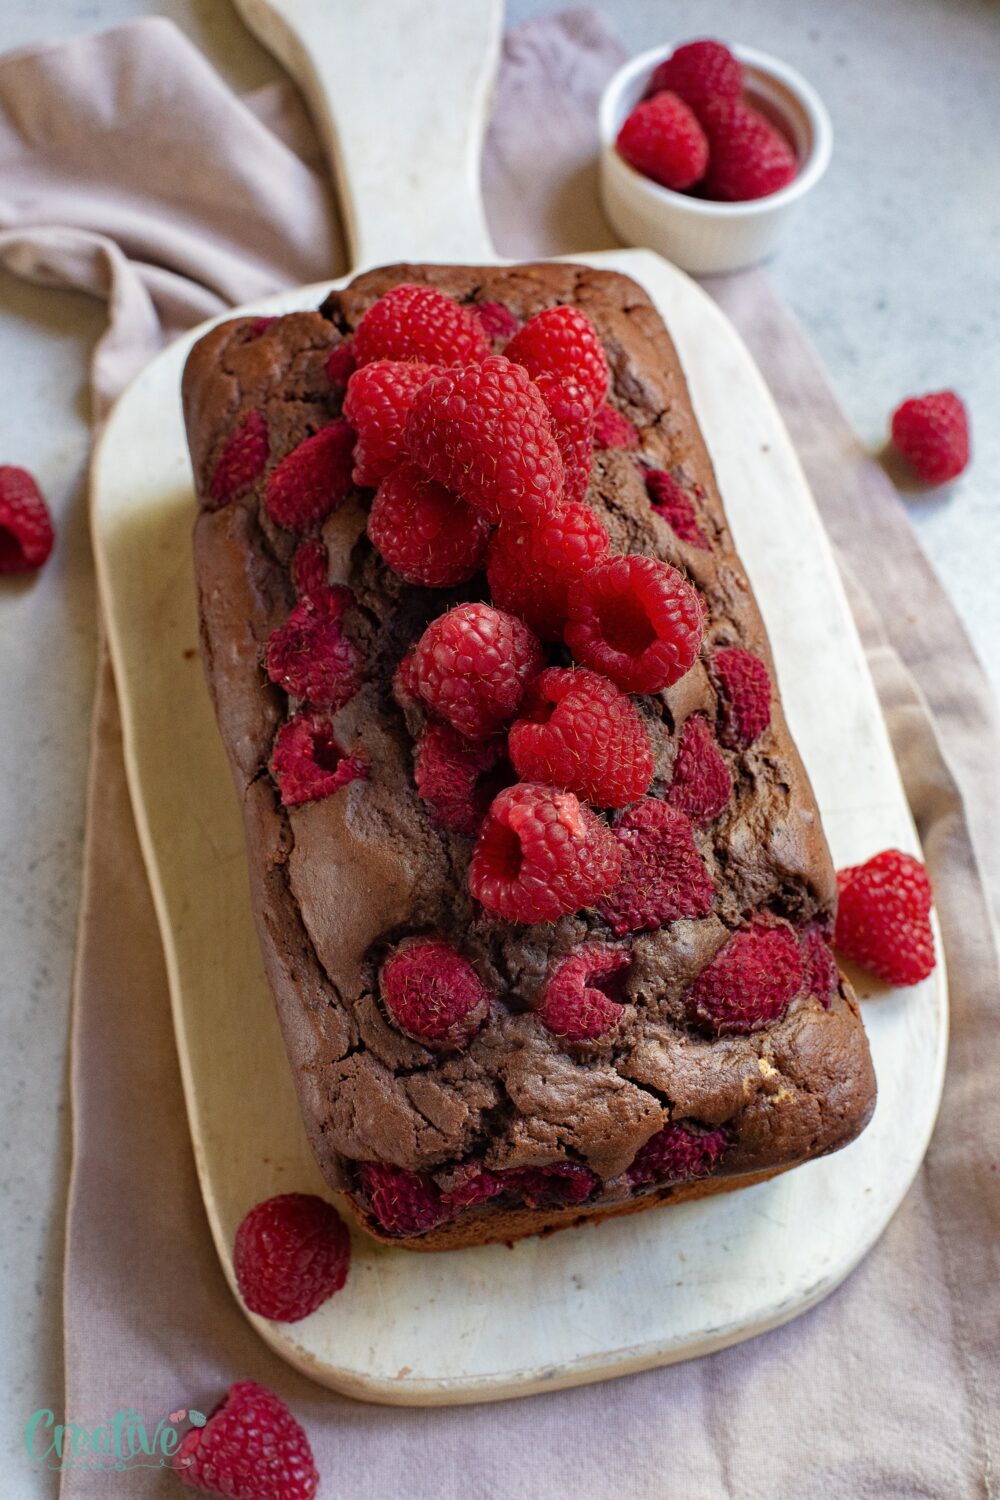 Moist and delicious raspberry chocolate pound cake that will satisfy your cravings! Perfect for any occasion or special indulgence.